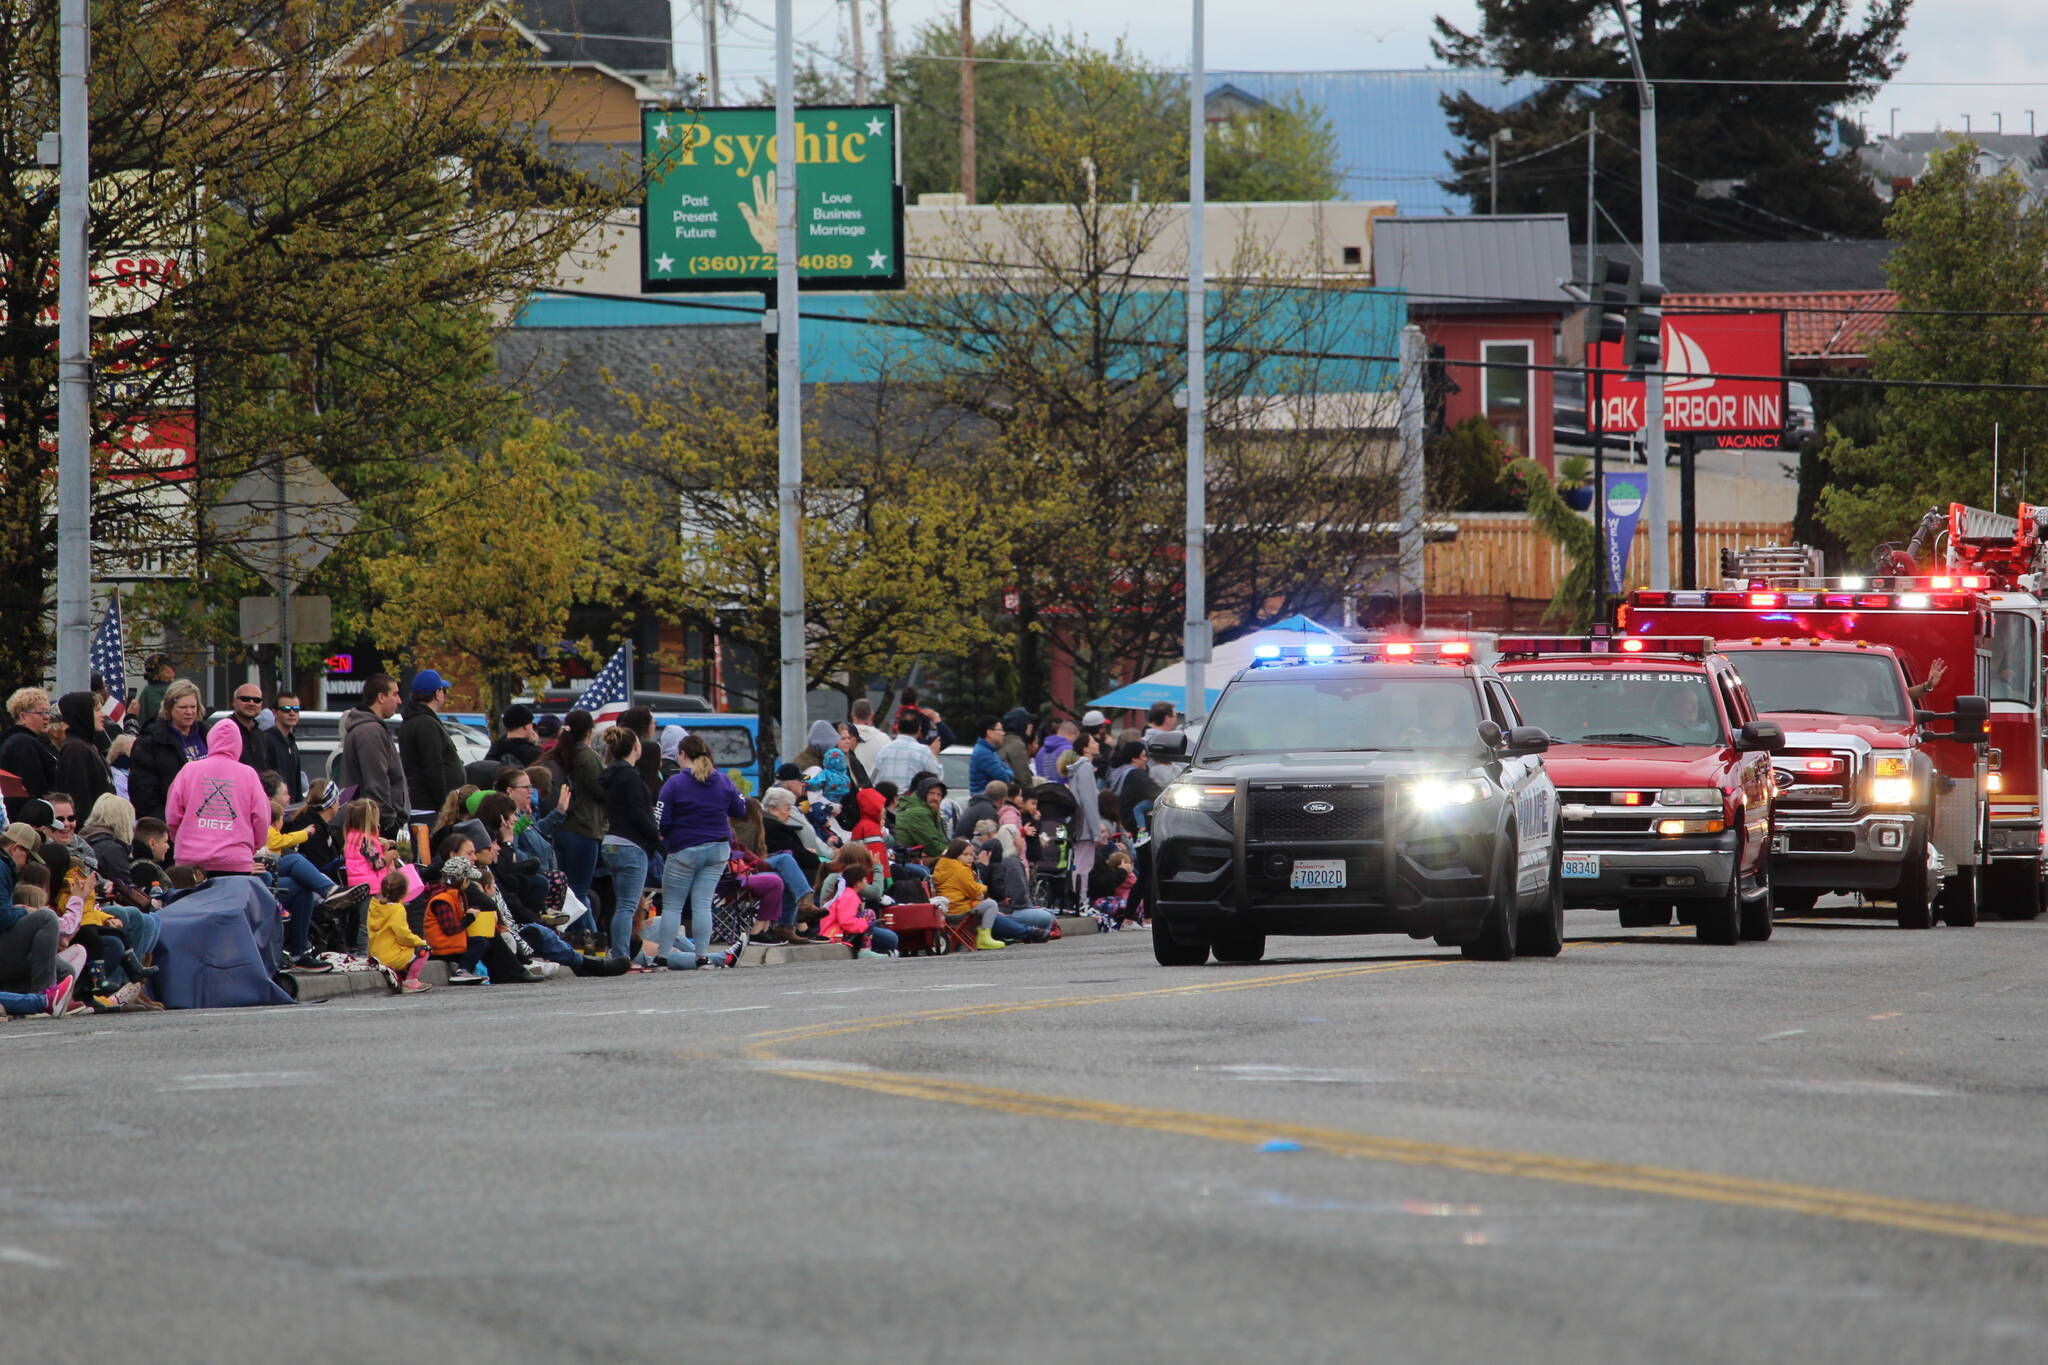 The Oak Harbor police kicked off the Holland Happening parade Saturday morning. (Photo by Karina Andrew/Whidbey News-Times)